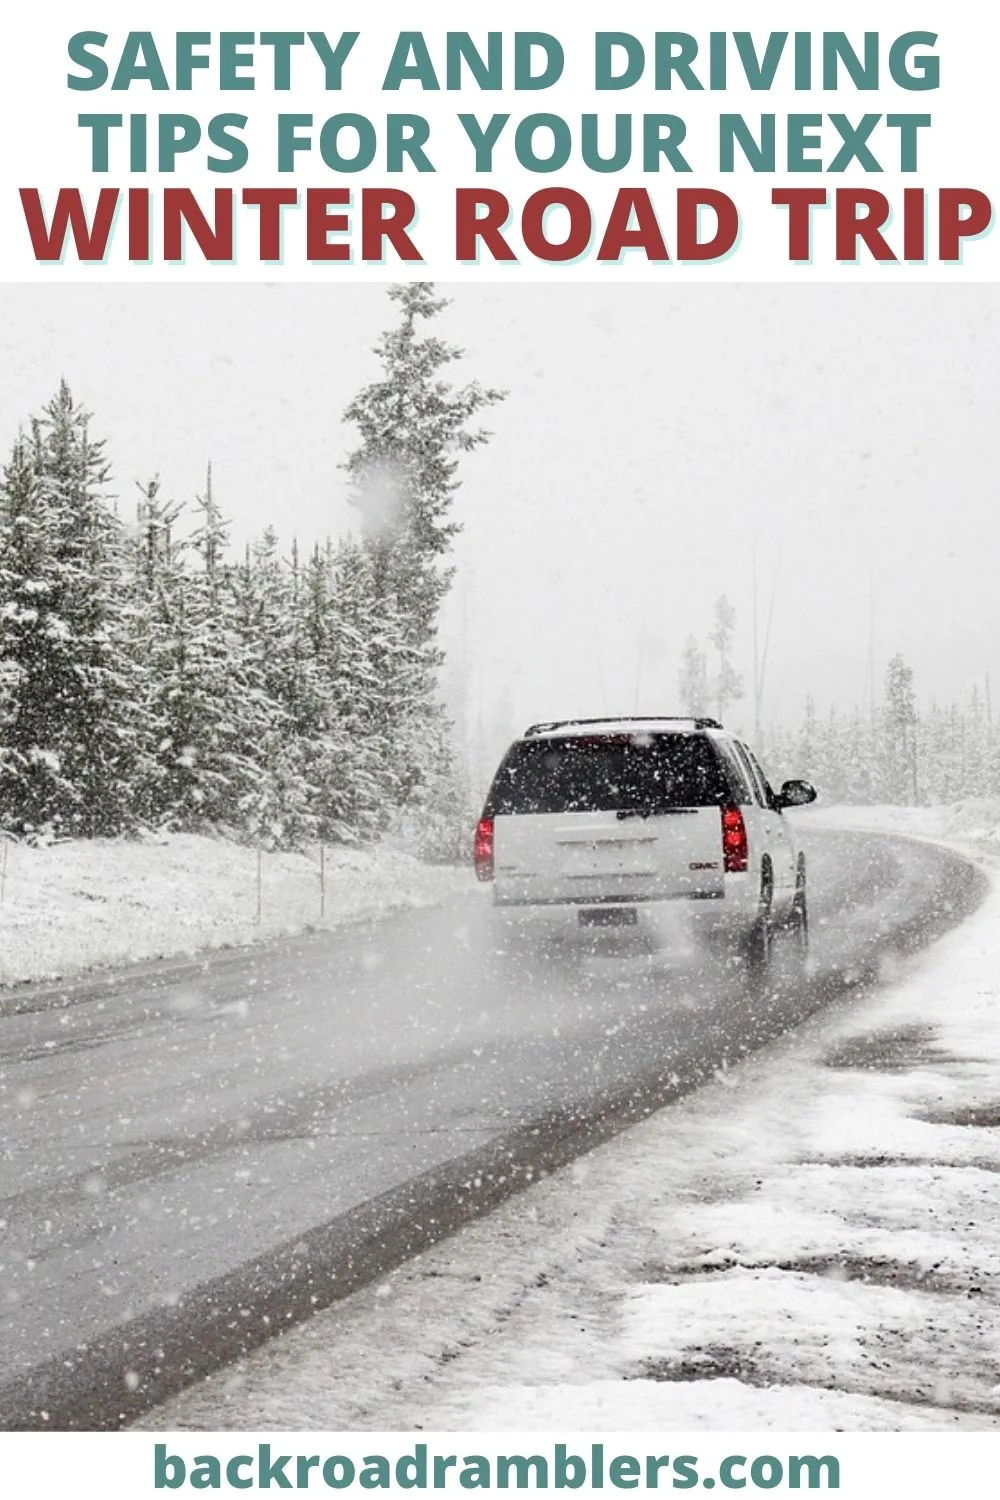 A car driving on a snowy road. Text overlay: Safety and Driving Tips for Your Next Winter Road Trip tips.